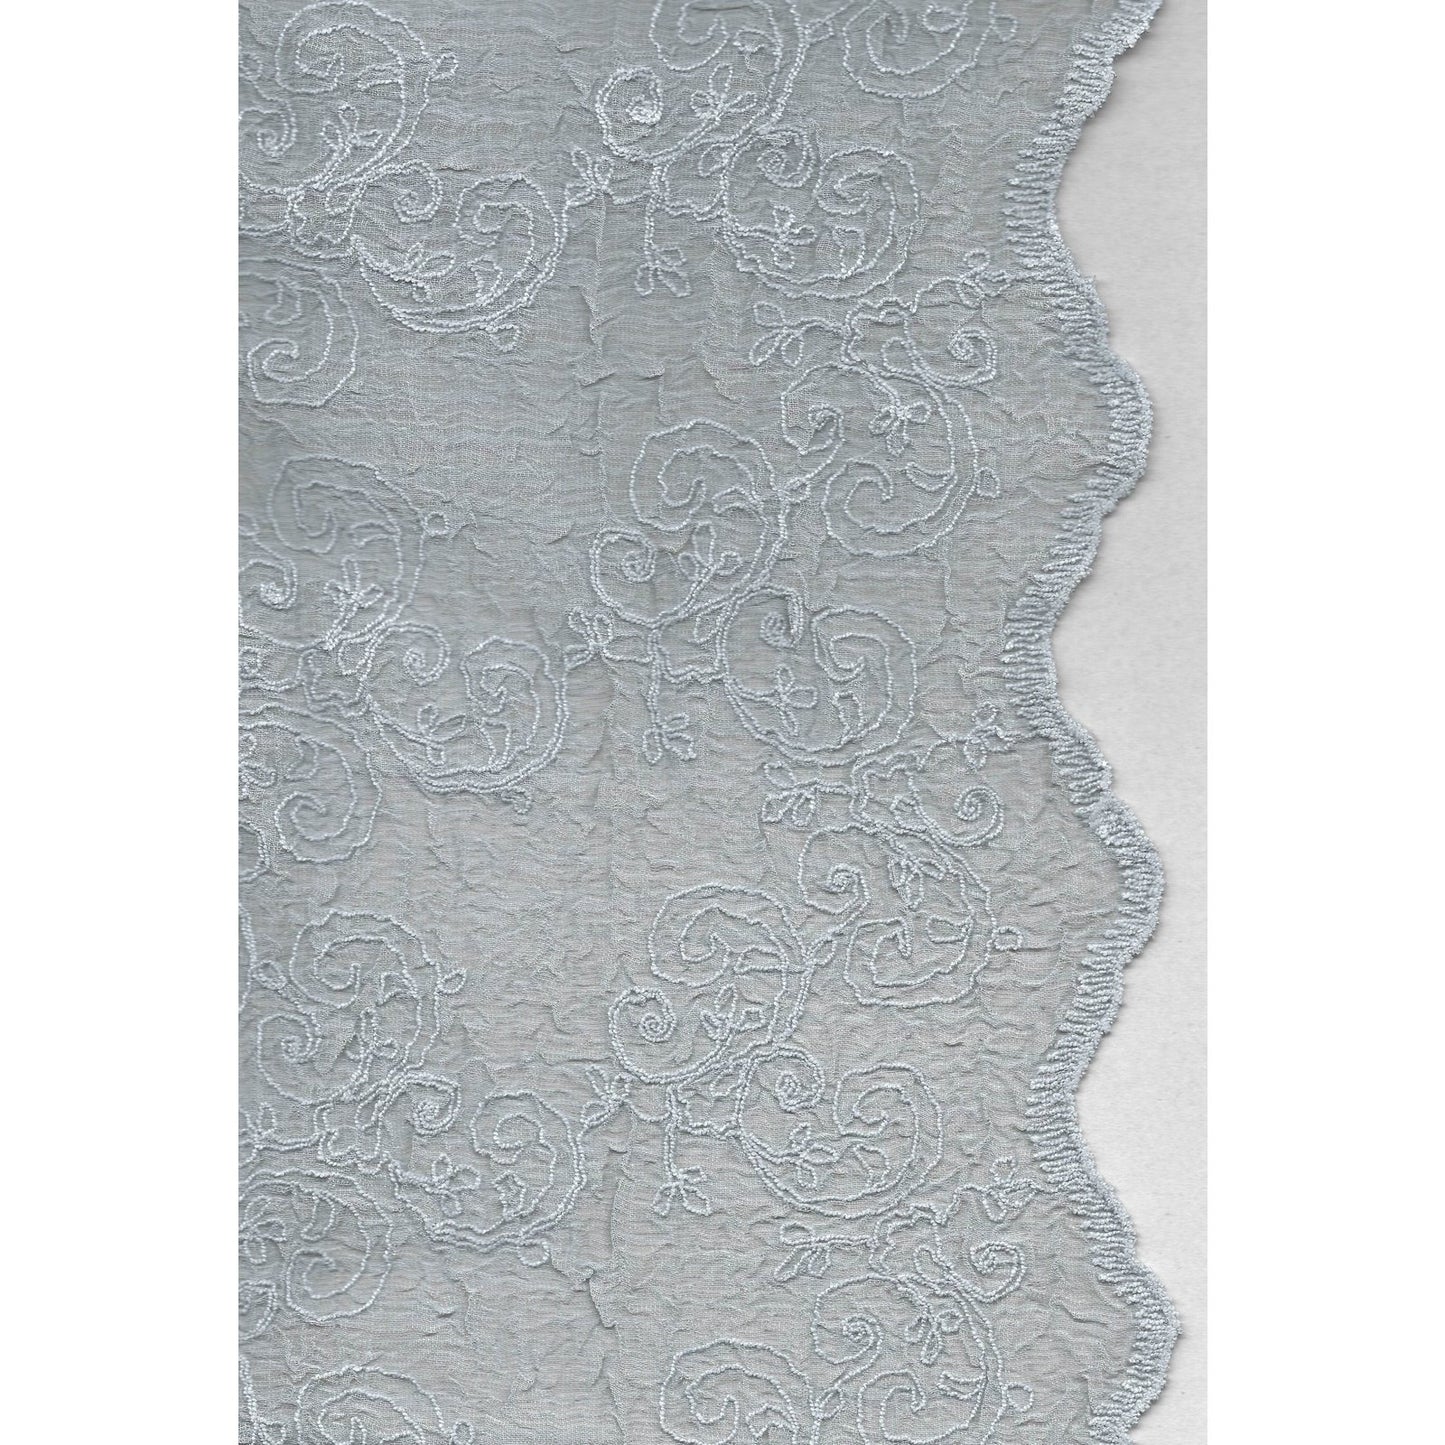 The design of this embroidered voile tablecloth is timeless. It will fit in many different interiors and give that elegant touch to your room.